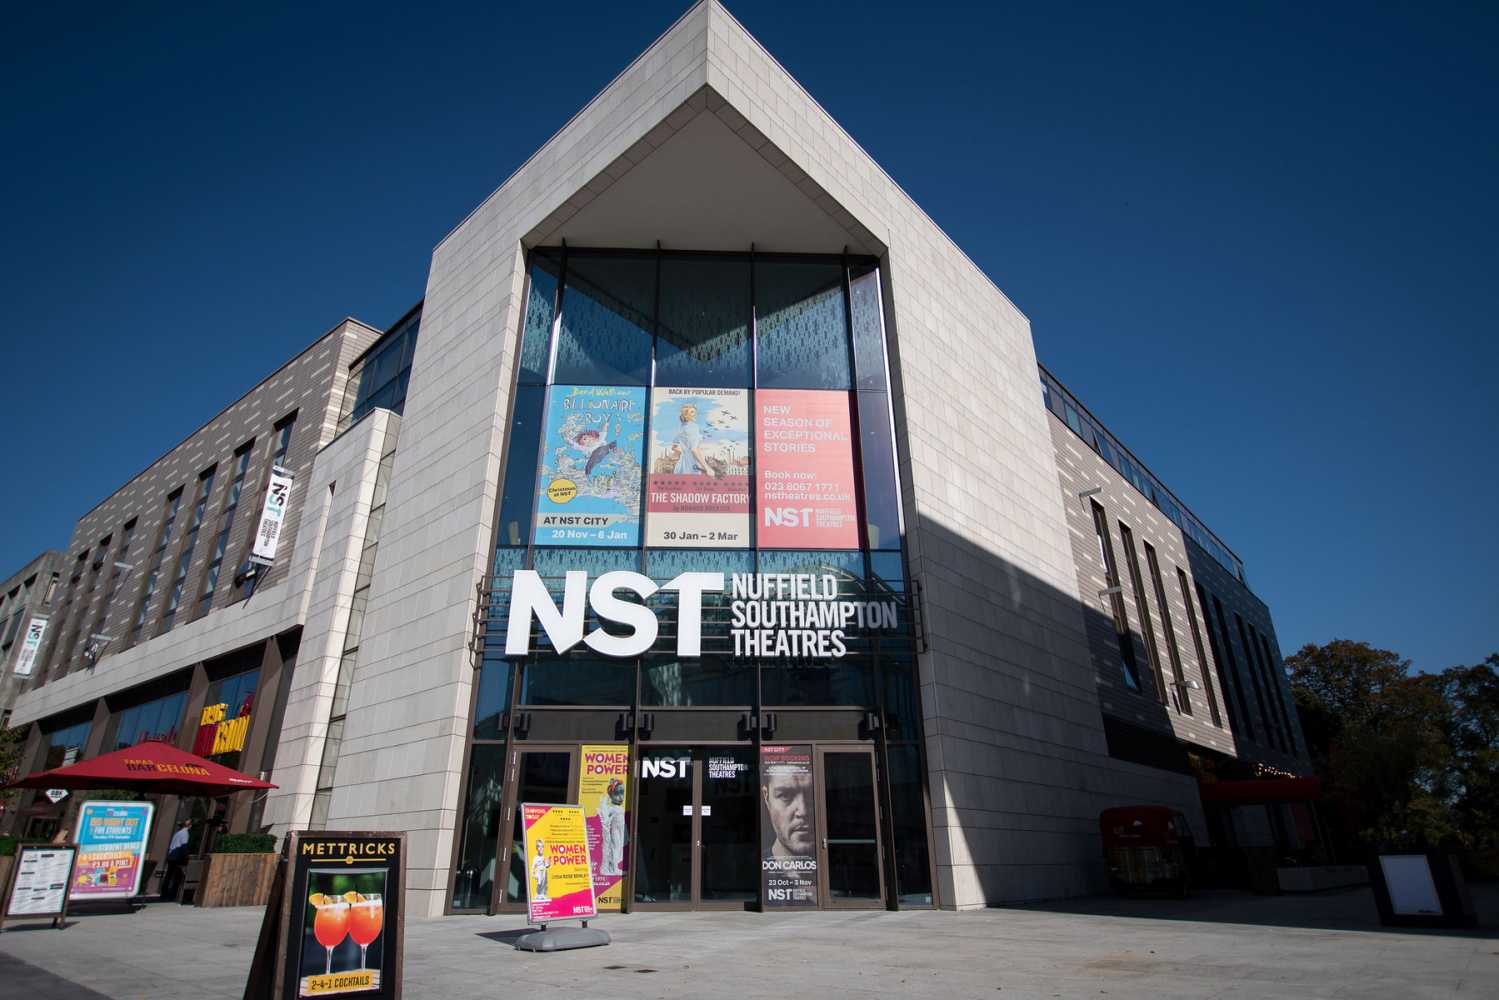 NST City aims to bring more music to Southampton